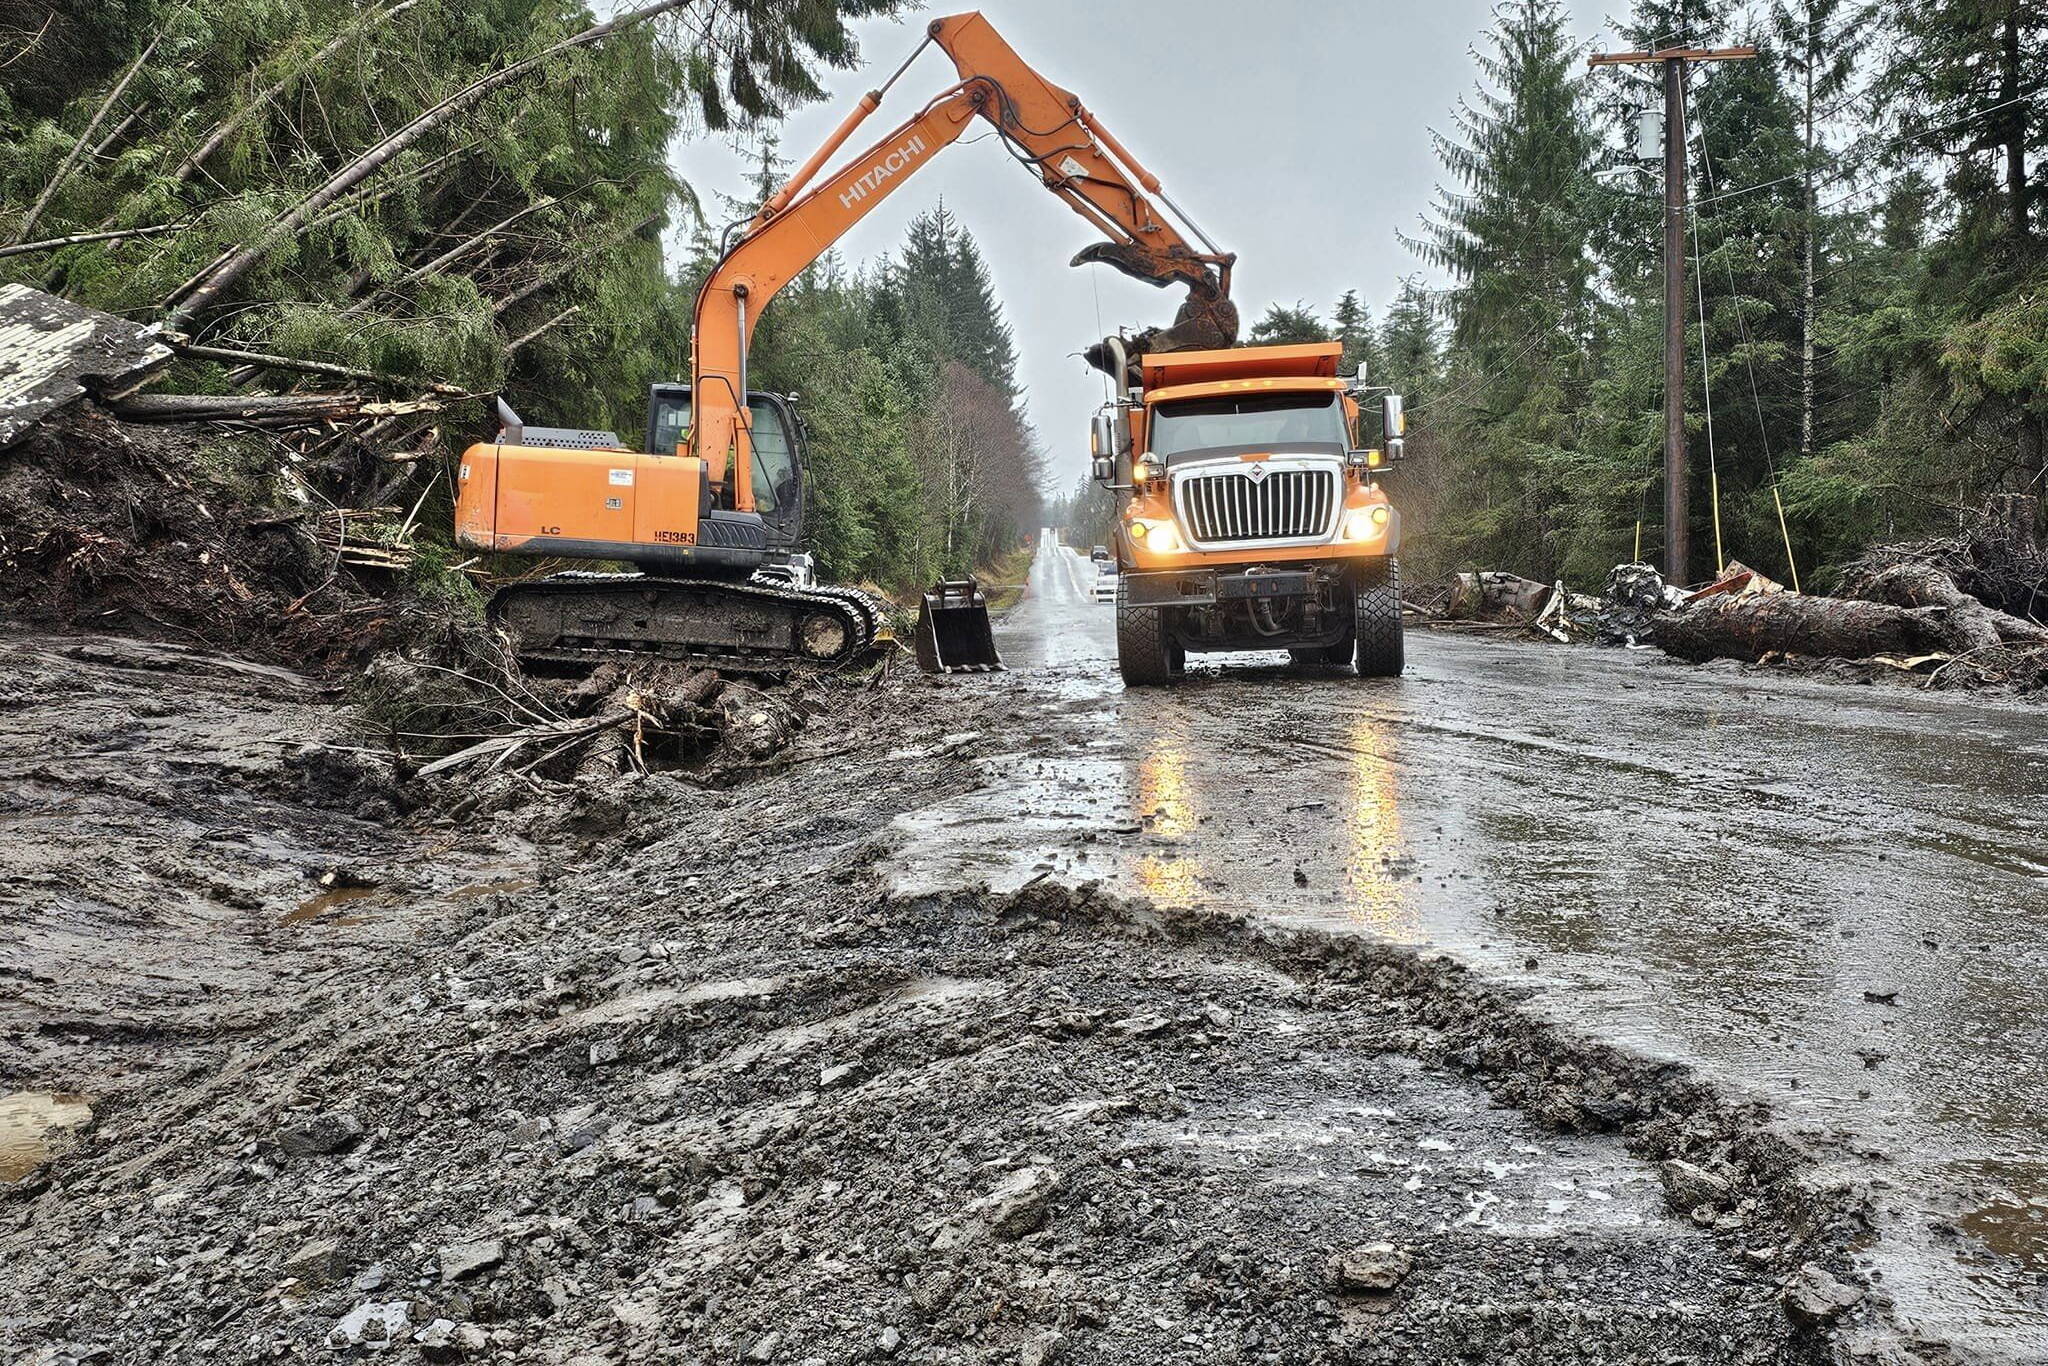 Work crews continue removing hundreds of truckloads of debris from Zimovia Highway since the Nov. 20 landslide in Wrangell. (Photo courtesy of the Alaska Department of Transportation and Public Facilities)